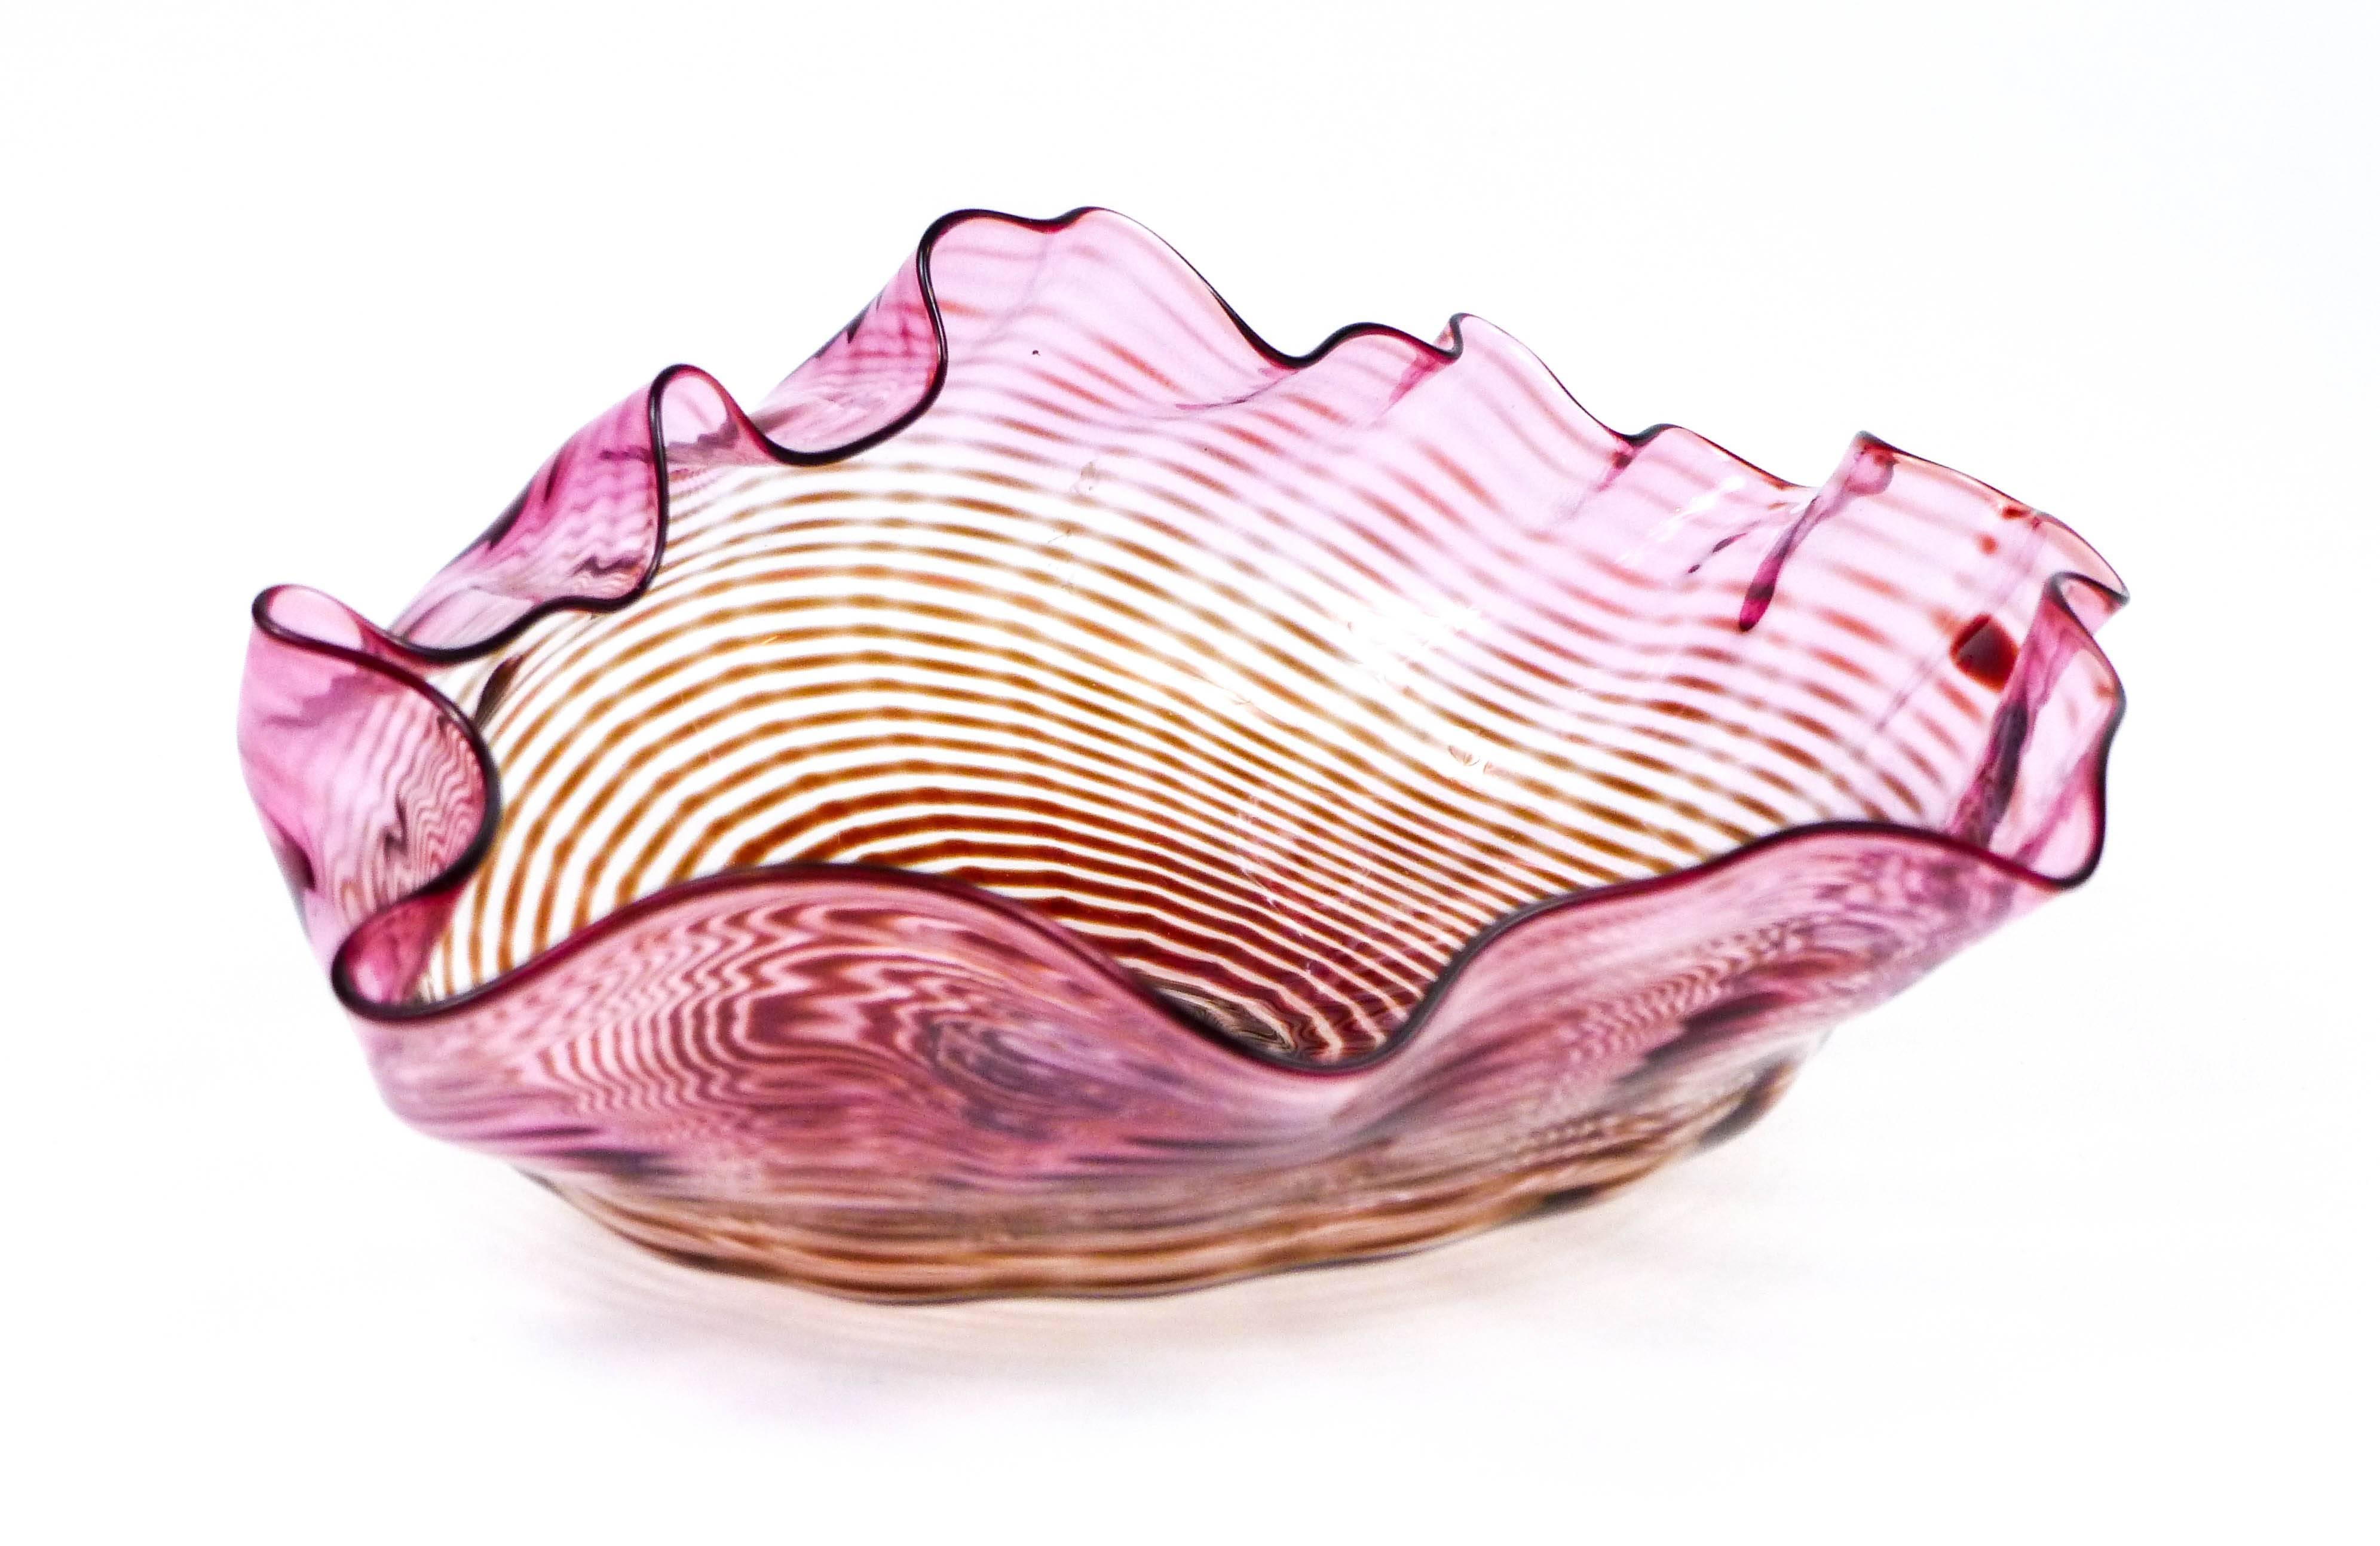 Here is an early miniature red seaform bowl by Dale Chihuly. This clam shell bowl is signed and dated 1982. It was purchased at the University of Illinois Craft Guild after Chihuly did a demonstration there in the early 1980's. Soft red coloring and